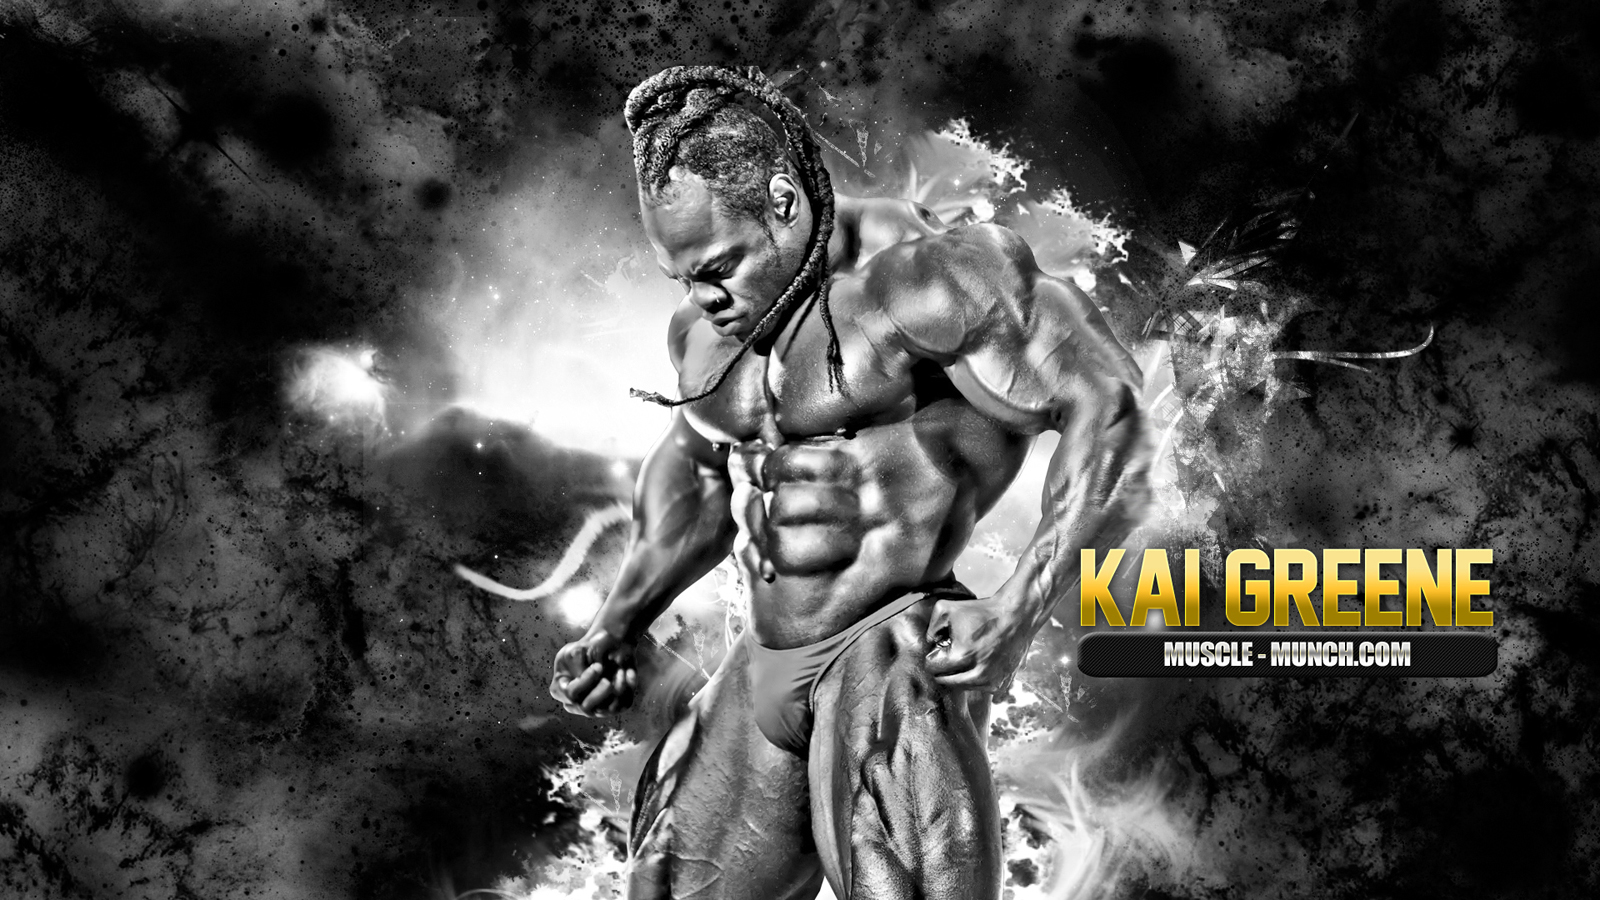 Kevin Levrone - Thank you Alexander ( Sasha ) for this amazing drawing. |  Facebook